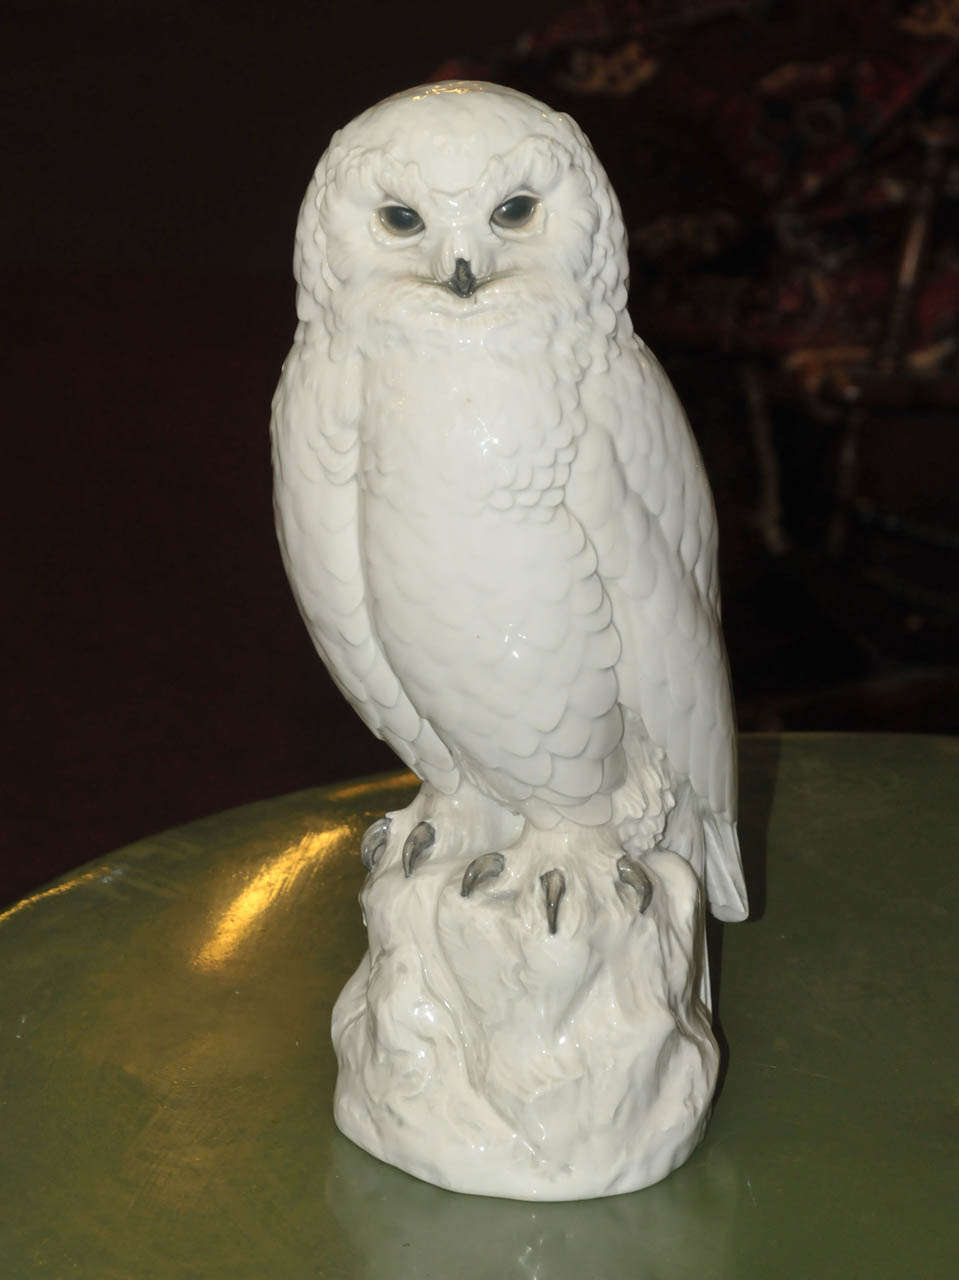 Late 19th Century porcelain owl. Lost part on the tail end. Good condition. Normal wear consistent with age and use.